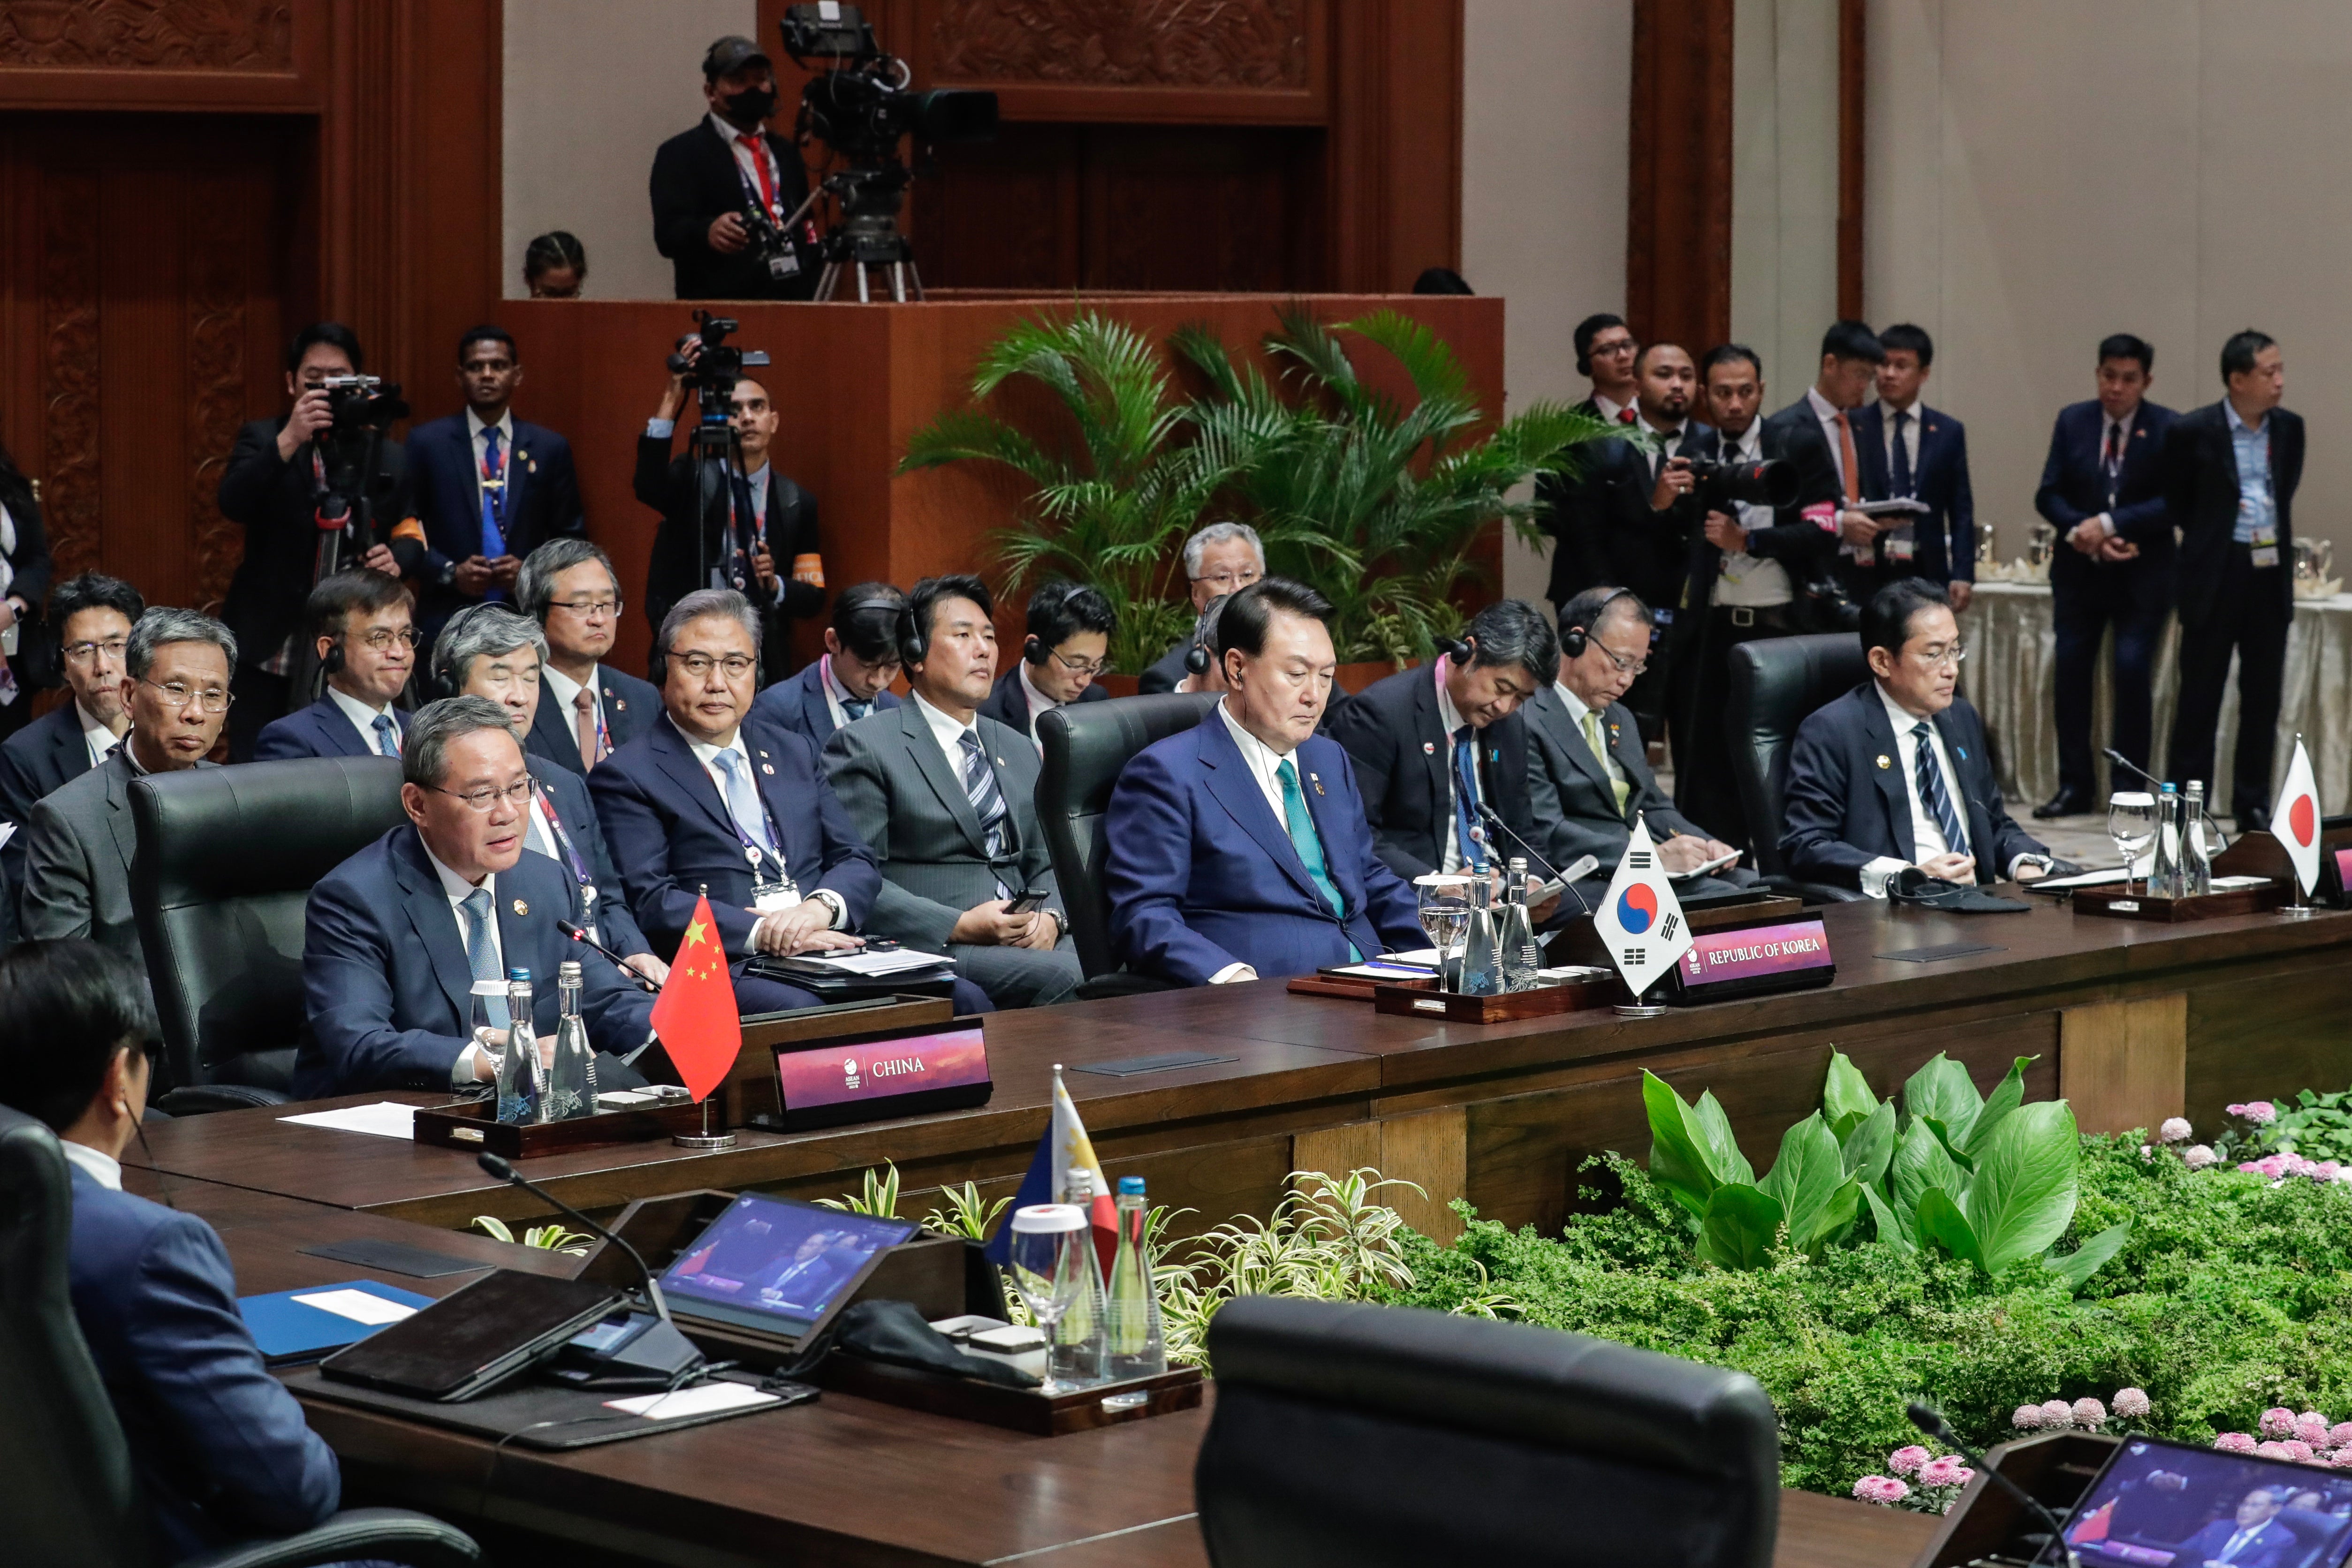 China’s Premier Li Qiang (L) delivers remarks as South Korean president Yoon Suk Yeol (C) and Japan’s prime minister Fumio Kishida (R) listen during the Asean Plus Three (APT) summit